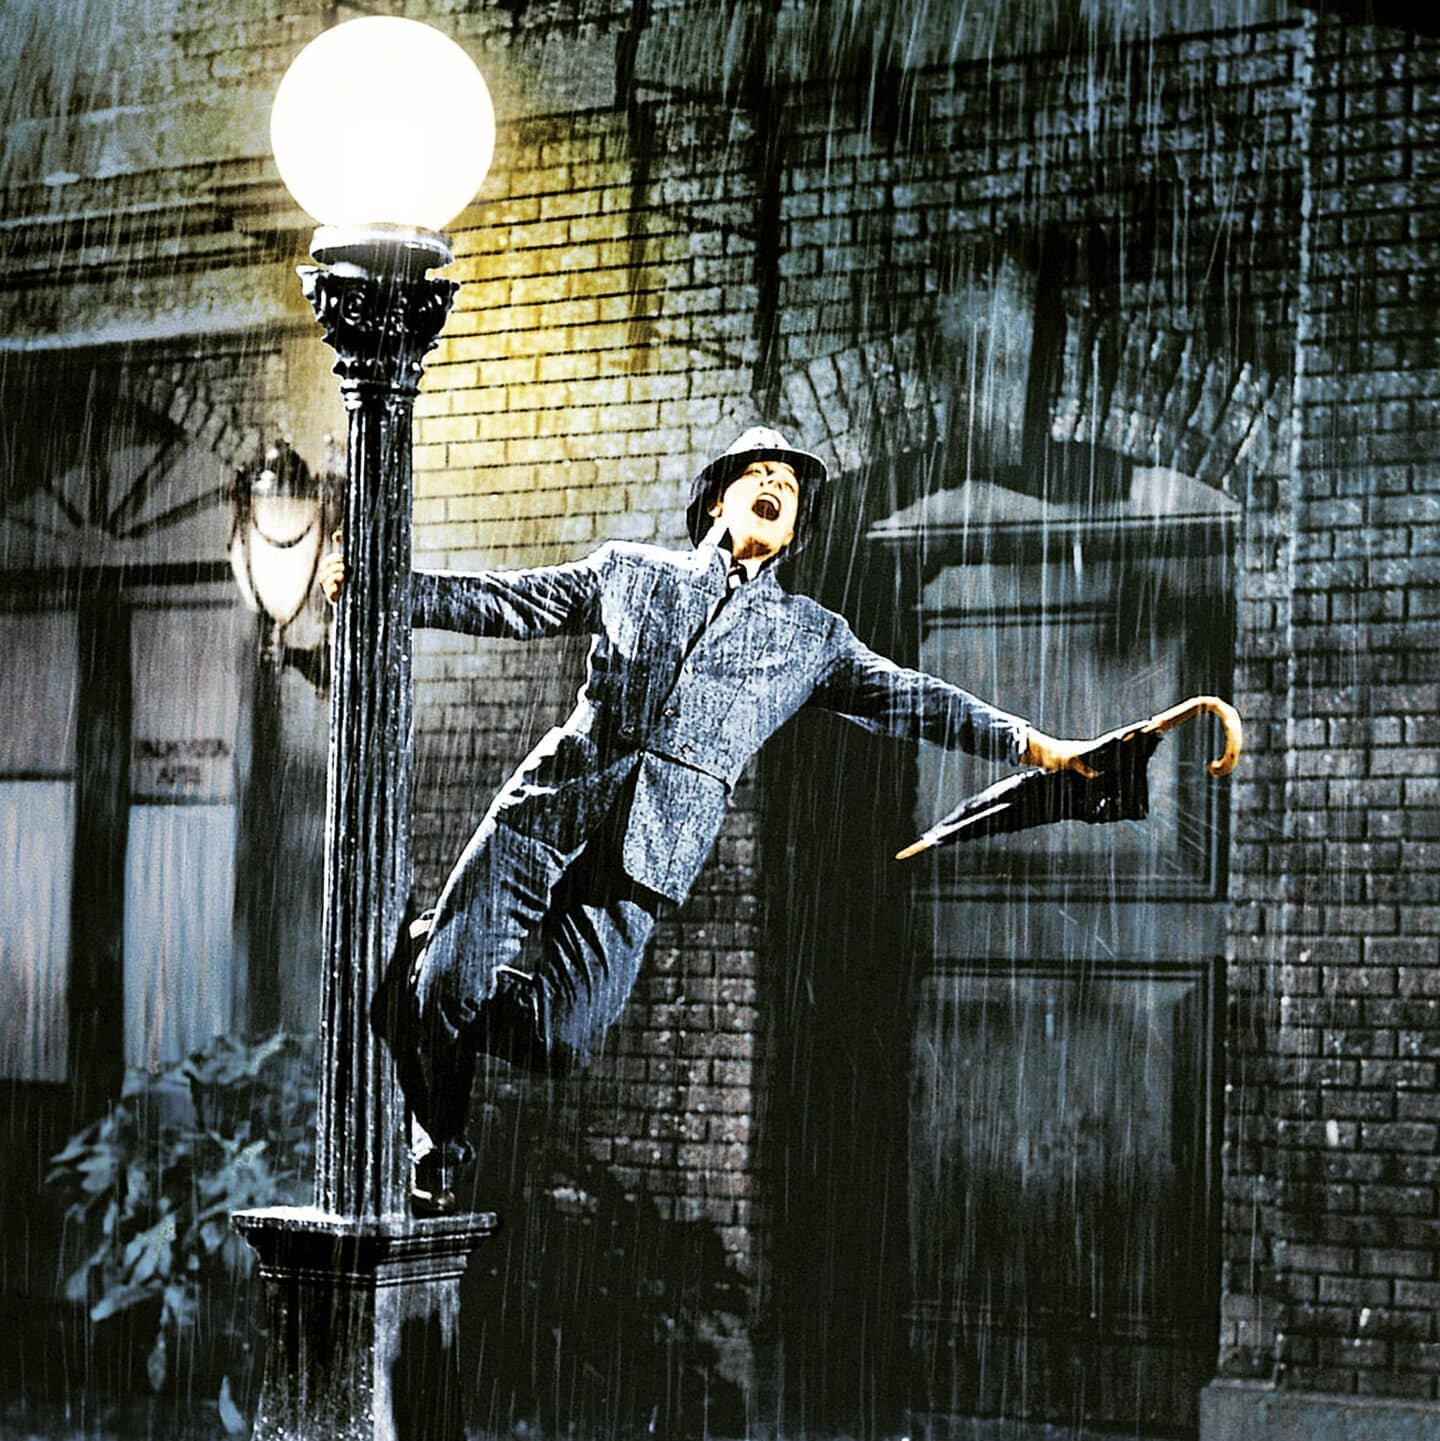 &quot;Let the stormy clouds chase 
Everyone from the place
Come with the rain
I've a smile on my face
I walked down the lane
With a hapoy refrain
Just singing,
Dancing in the rain&quot; - Singing in the Rain 👨&zwj;🎤Lyrics by #ArthurFreed, 
🎼Music 